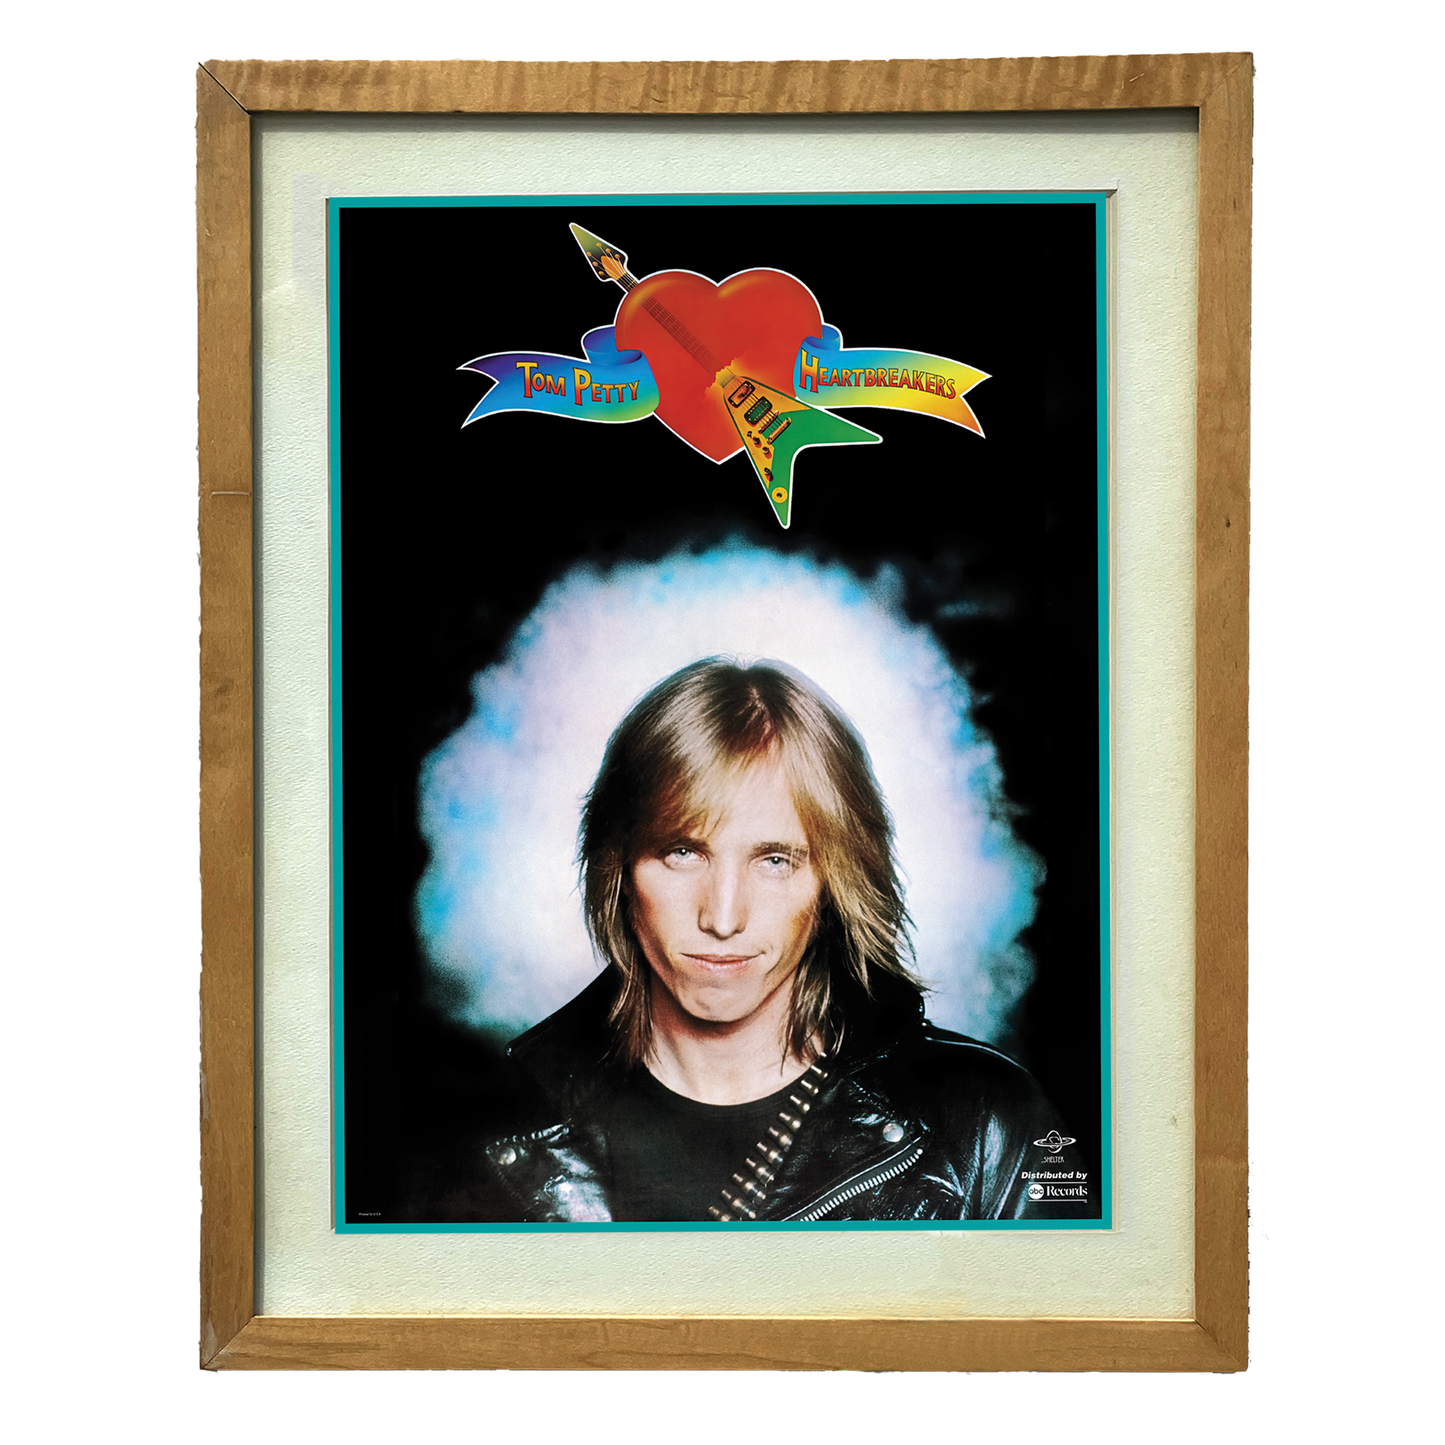 1976 Tom Petty & The Heartbreakers Cover Poster